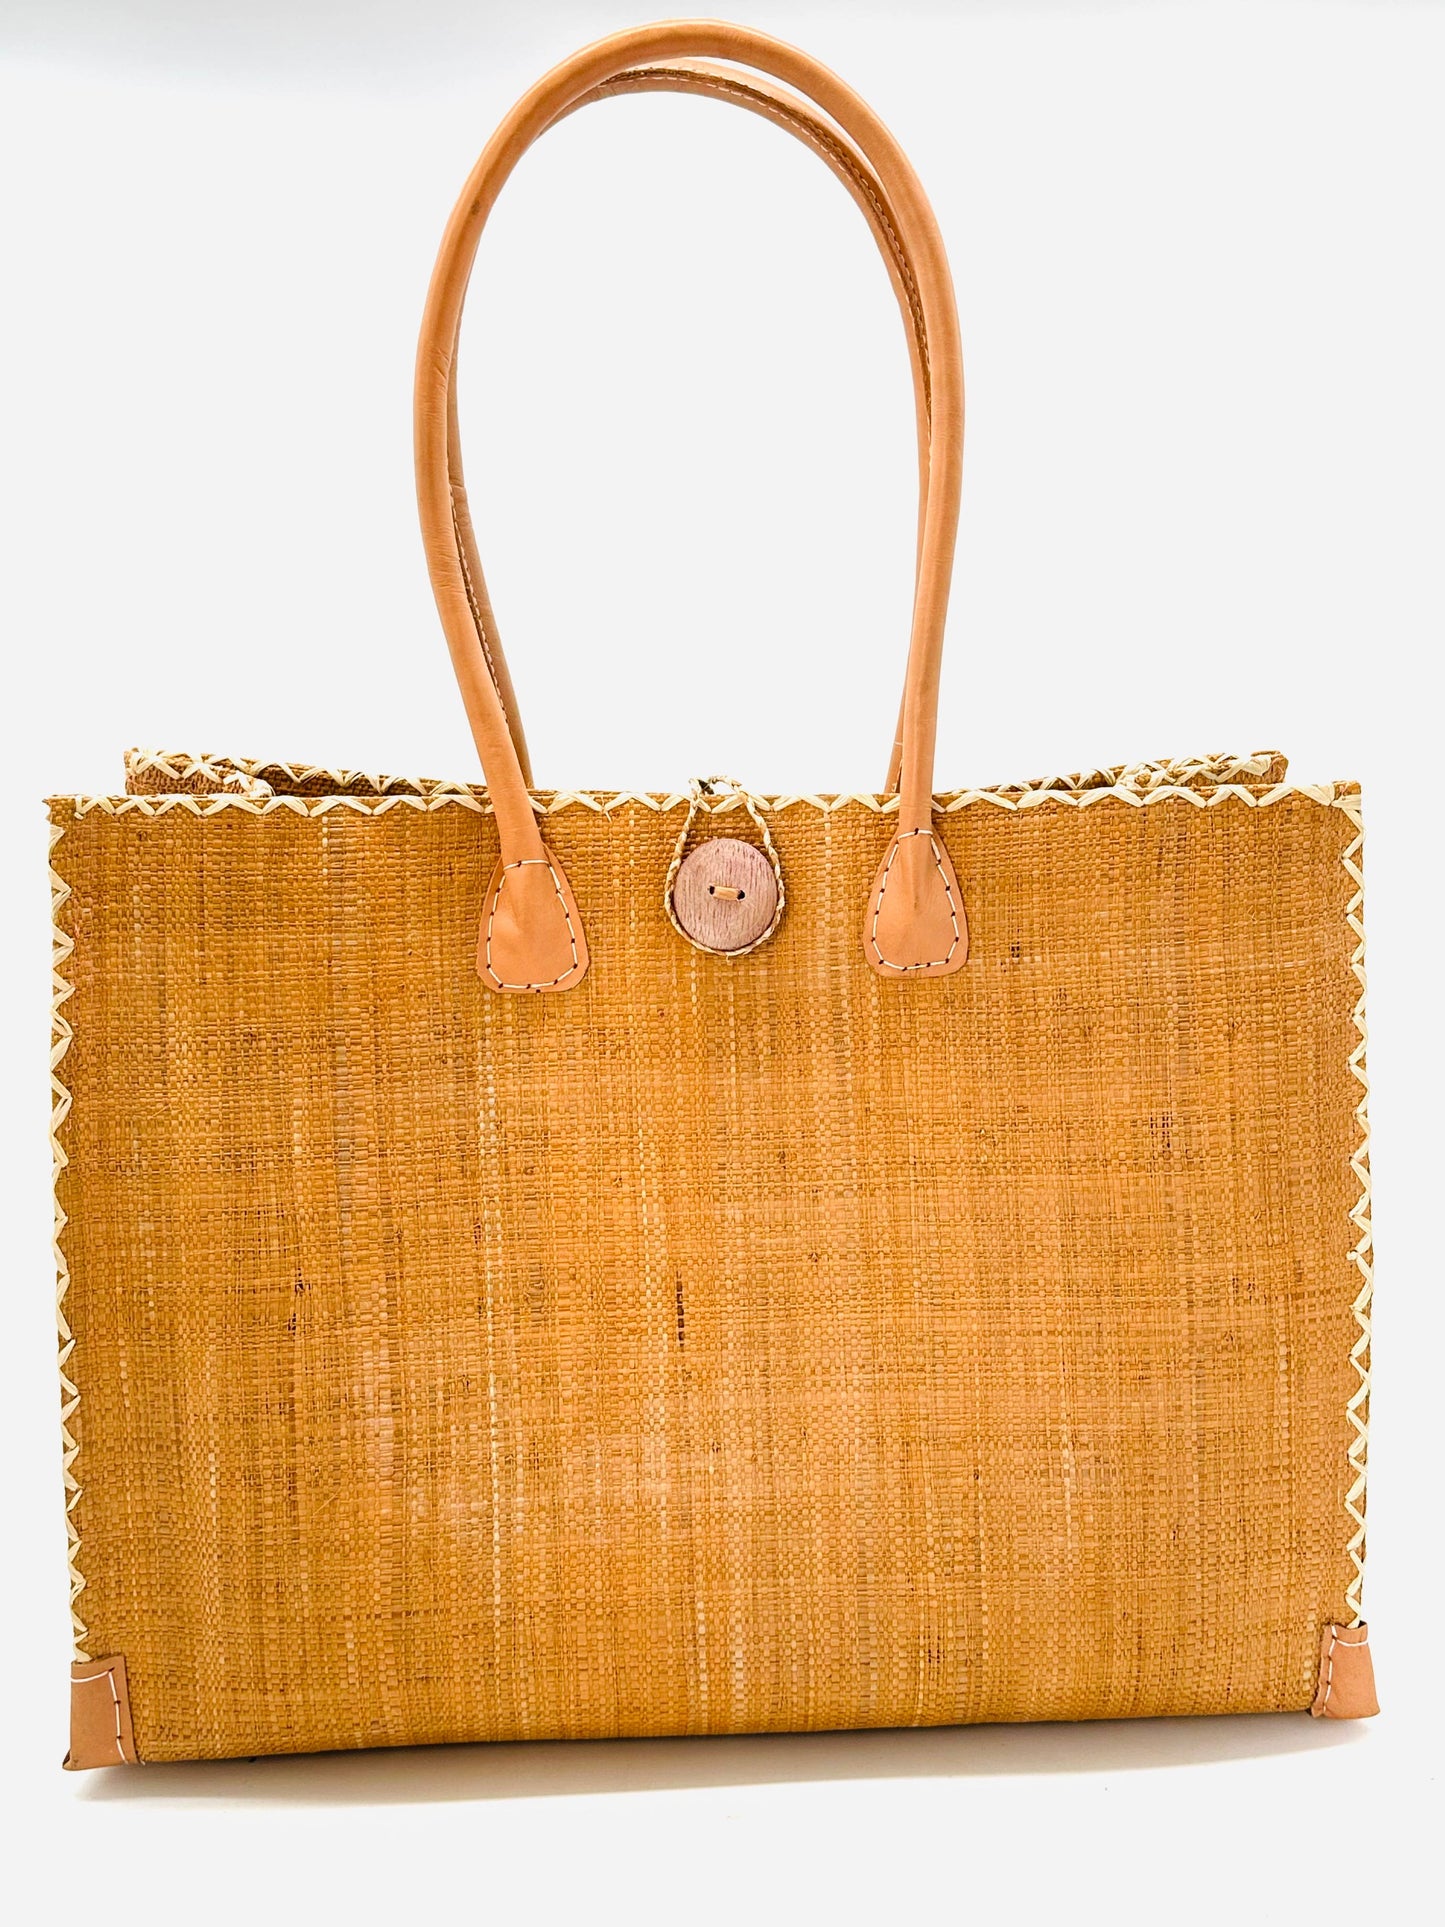 Zafran Solid Straw Beach Bag with Plastic Liner